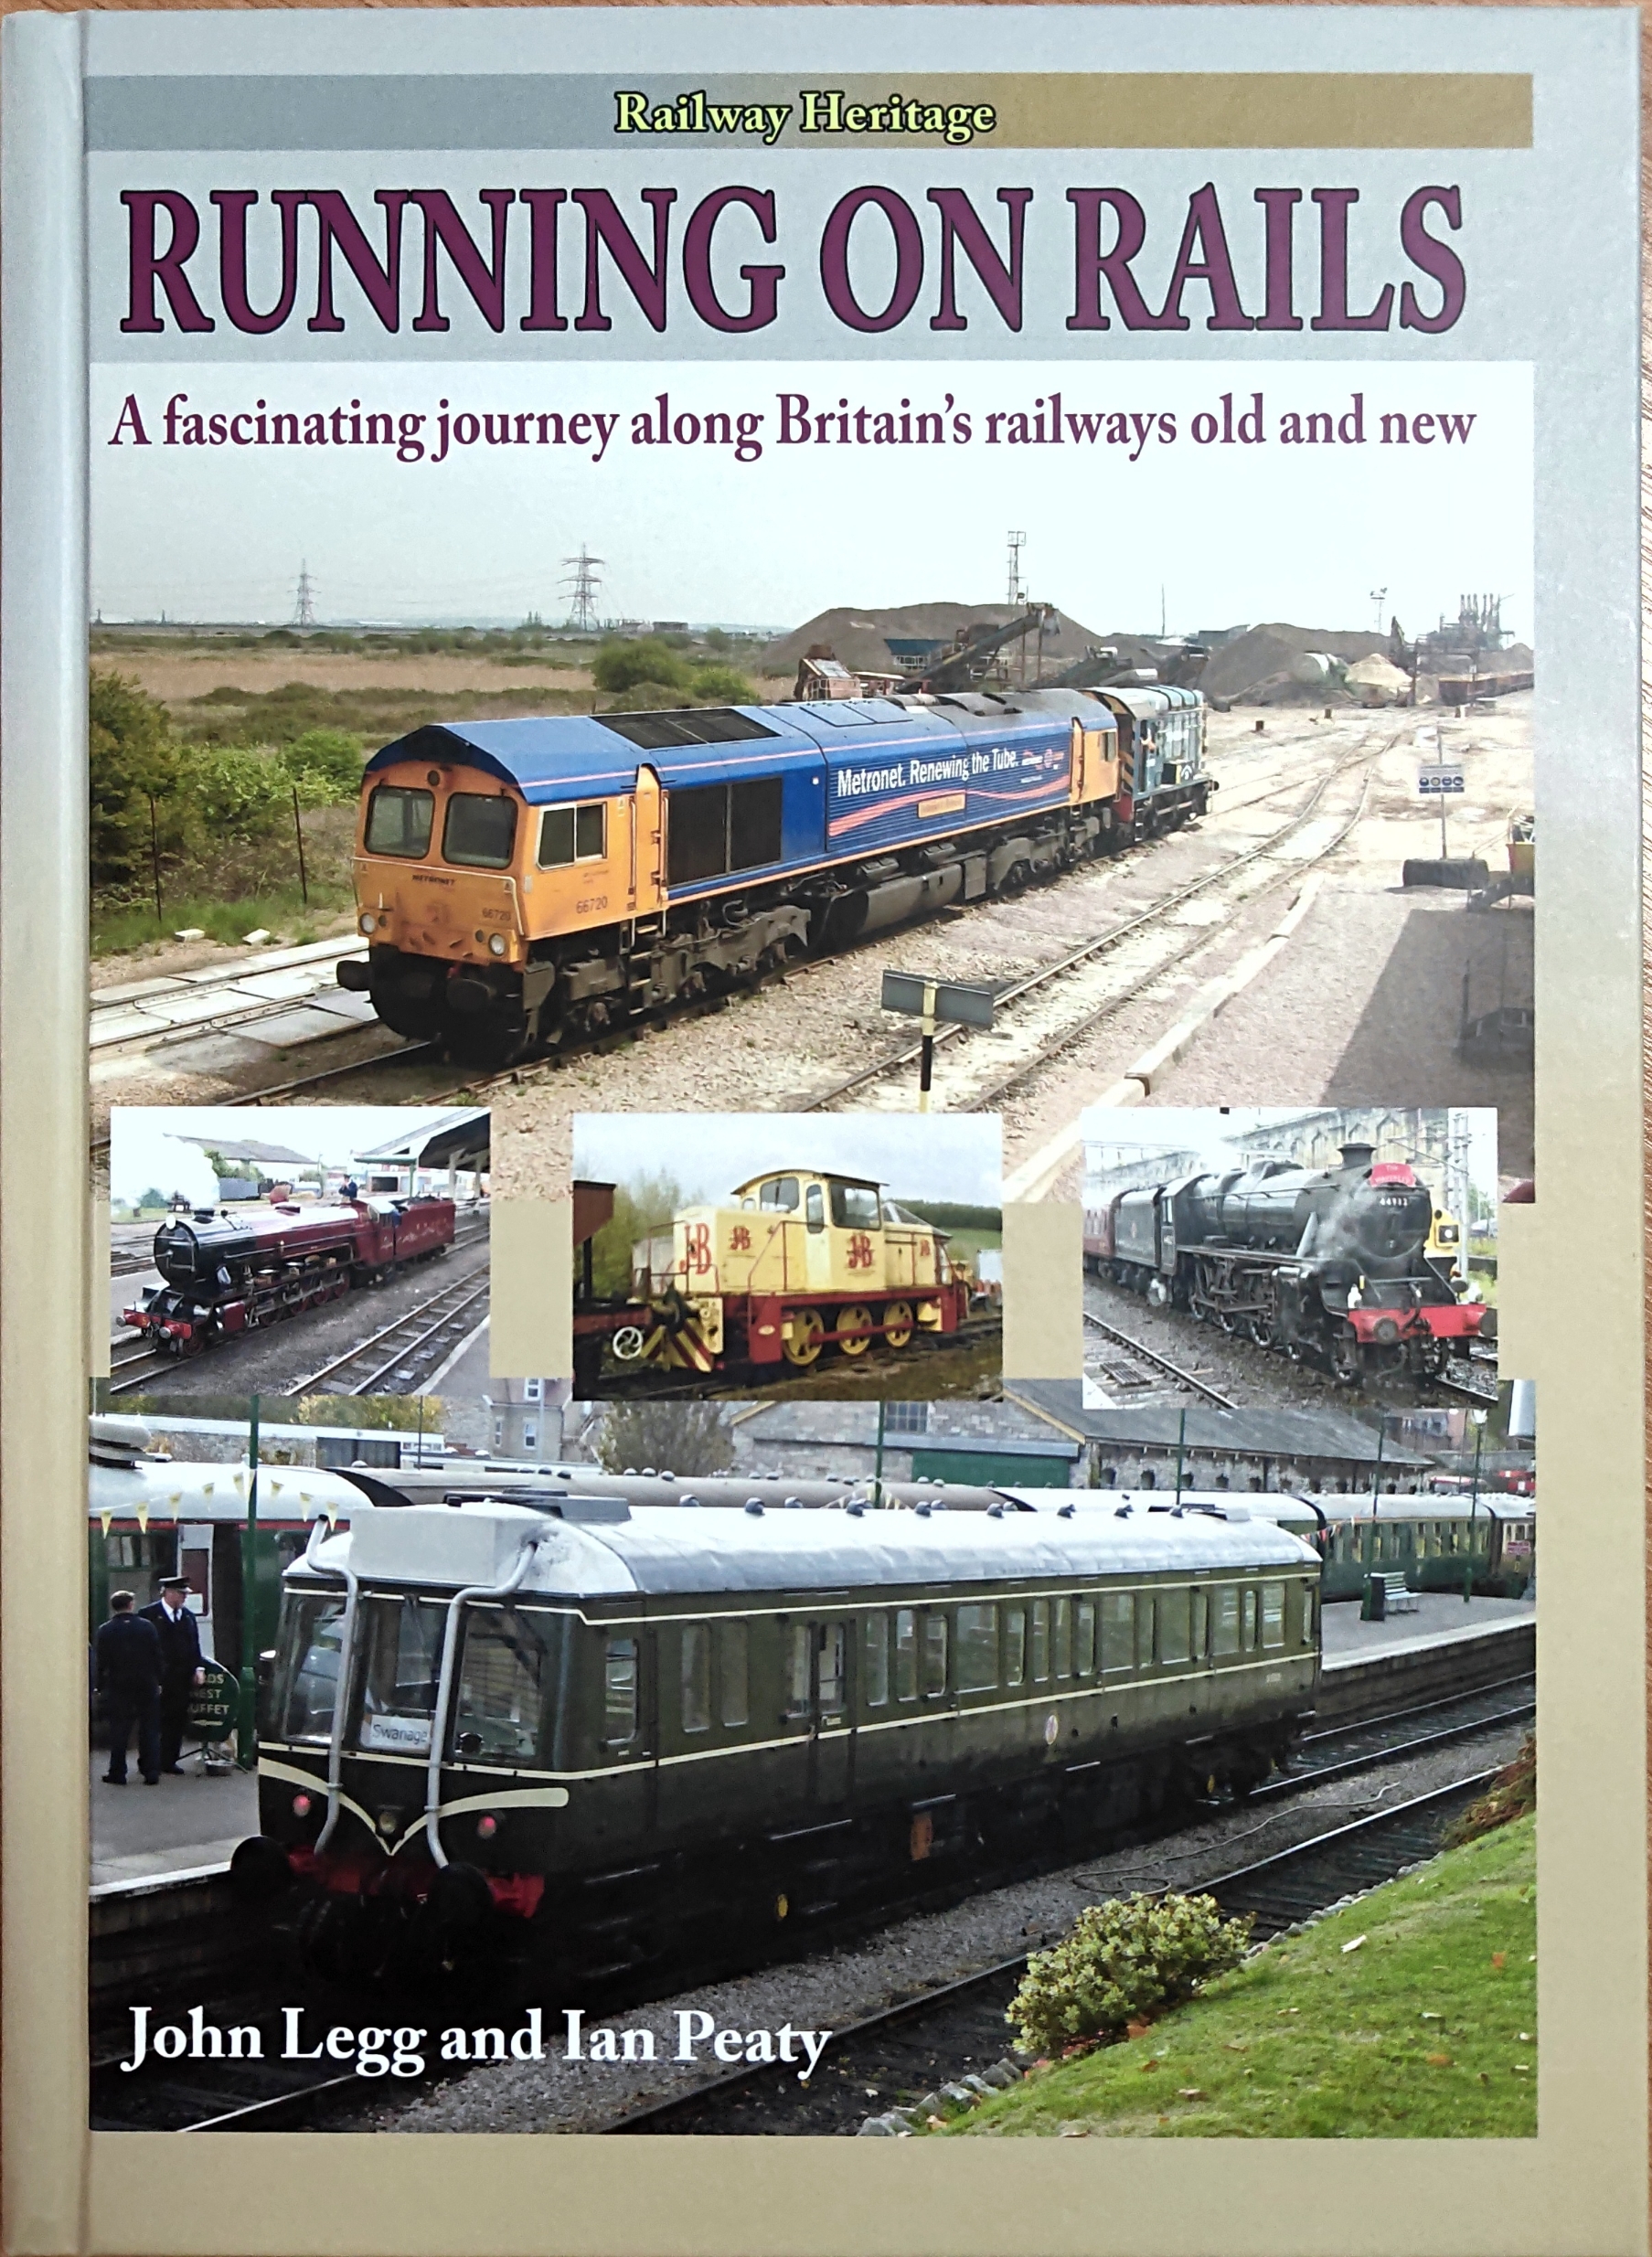 5485  Running on rails A fascinating journey along Britain's railways old and new